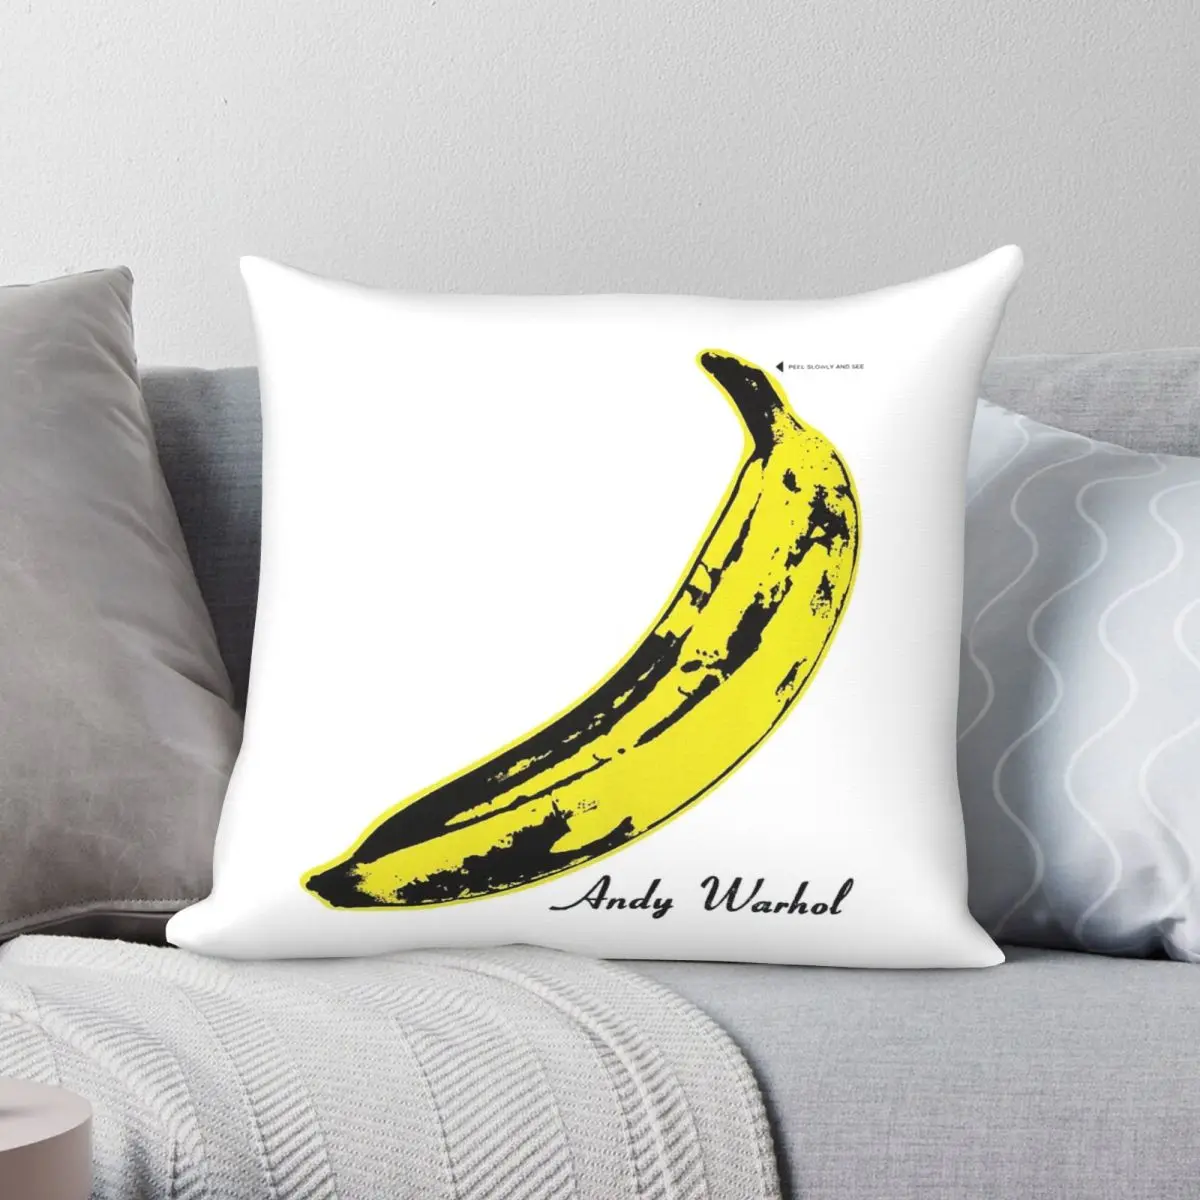 

Andy Warhol The Banana Square Pillowcase Polyester Linen Velvet Printed Zip Decor Throw Pillow Case Bed Cushion Cover Wholesale